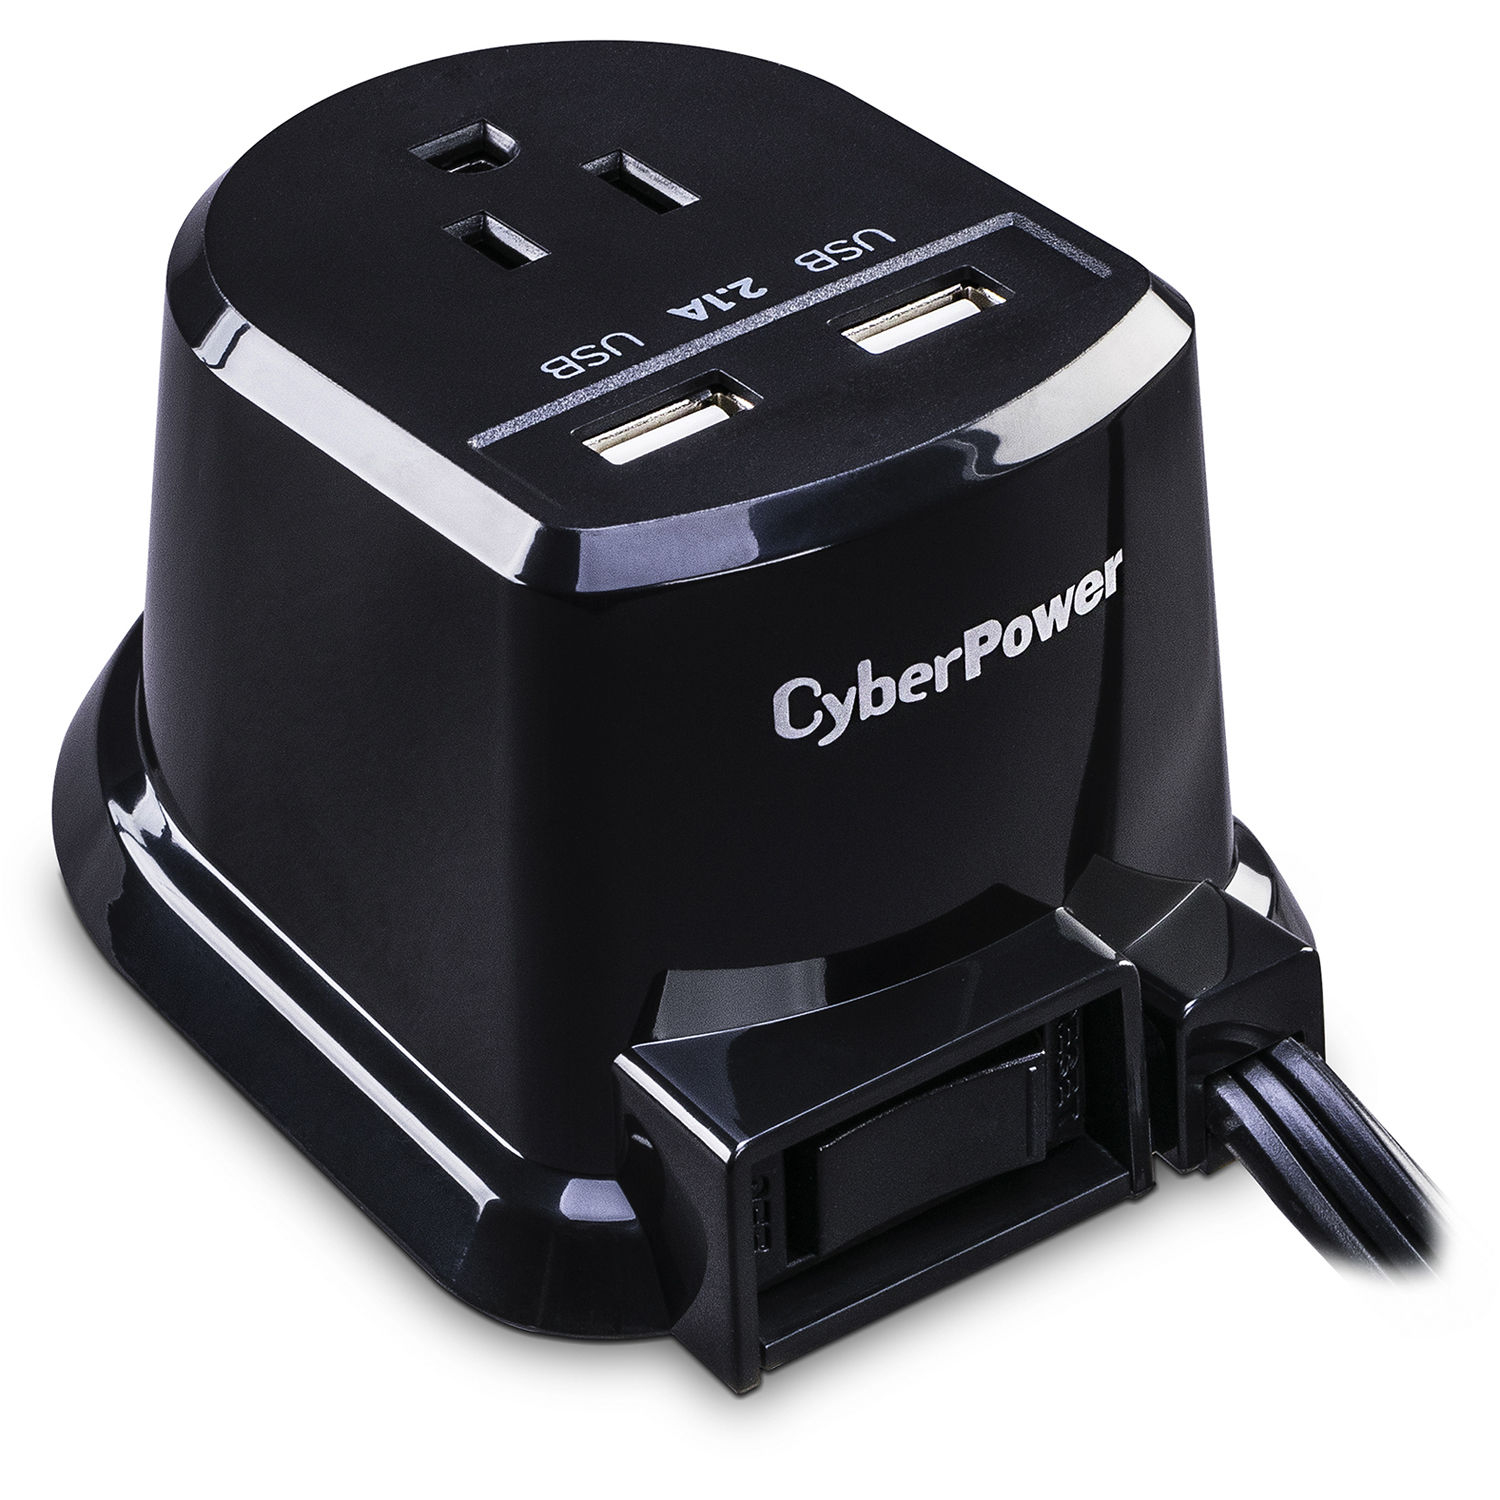 cyberpower support drivers